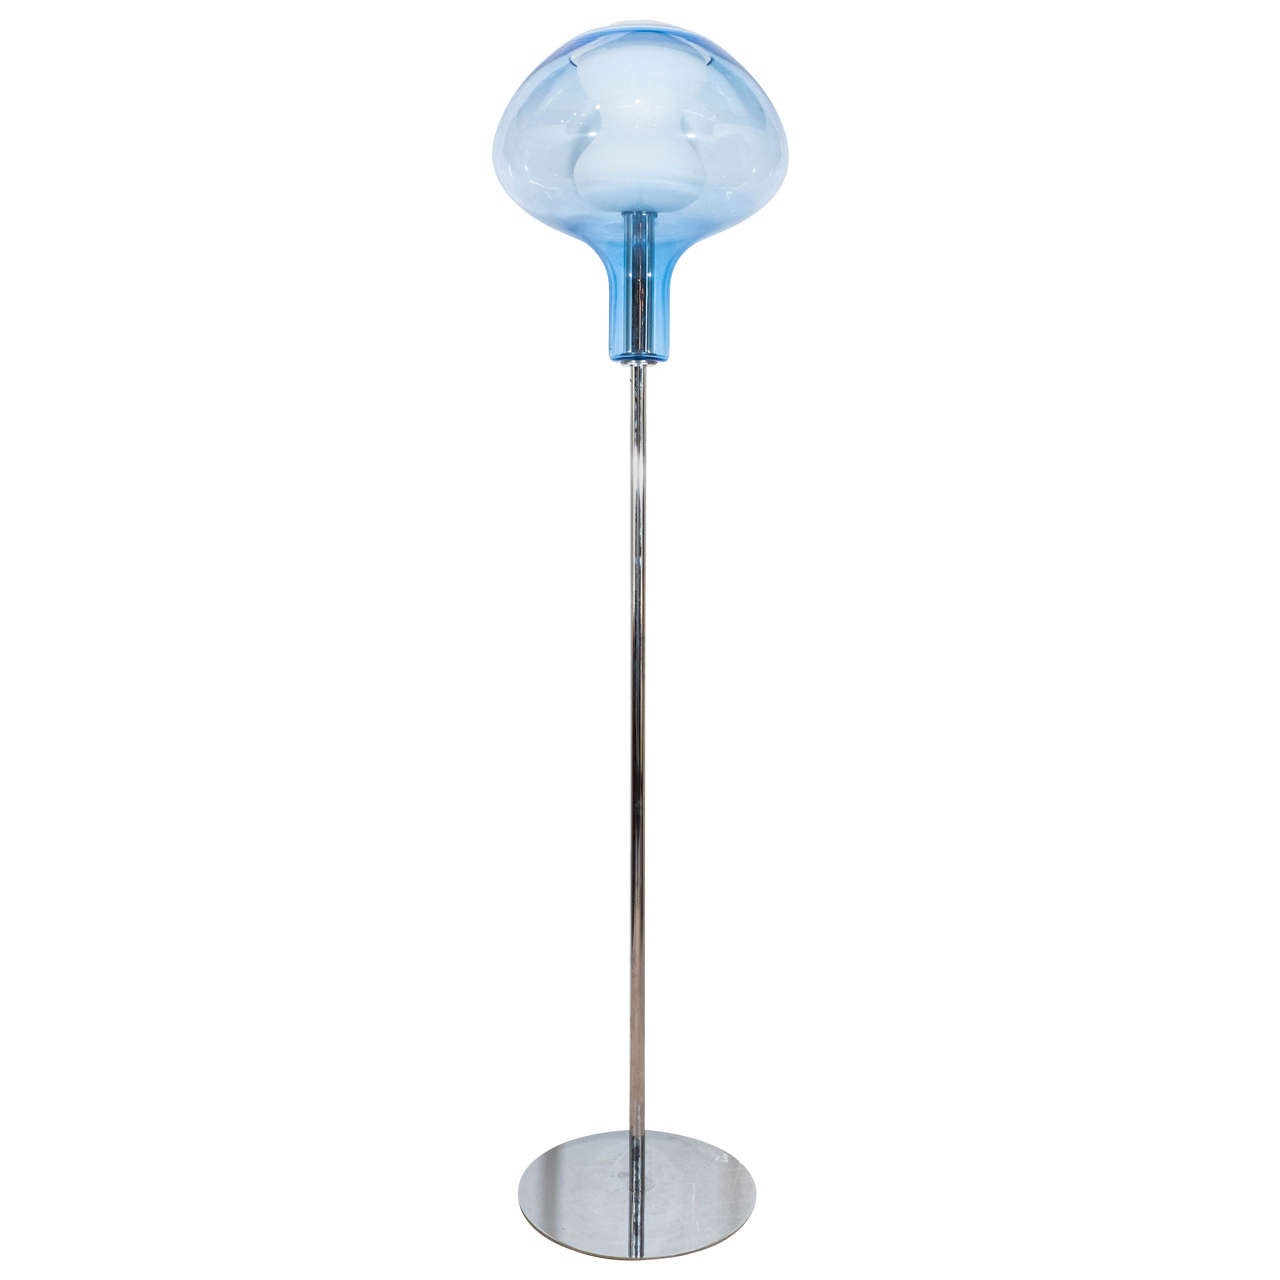 A Midcentury Floor Lamp with Dual Murano Glass Shade in Blue and White Lattimo